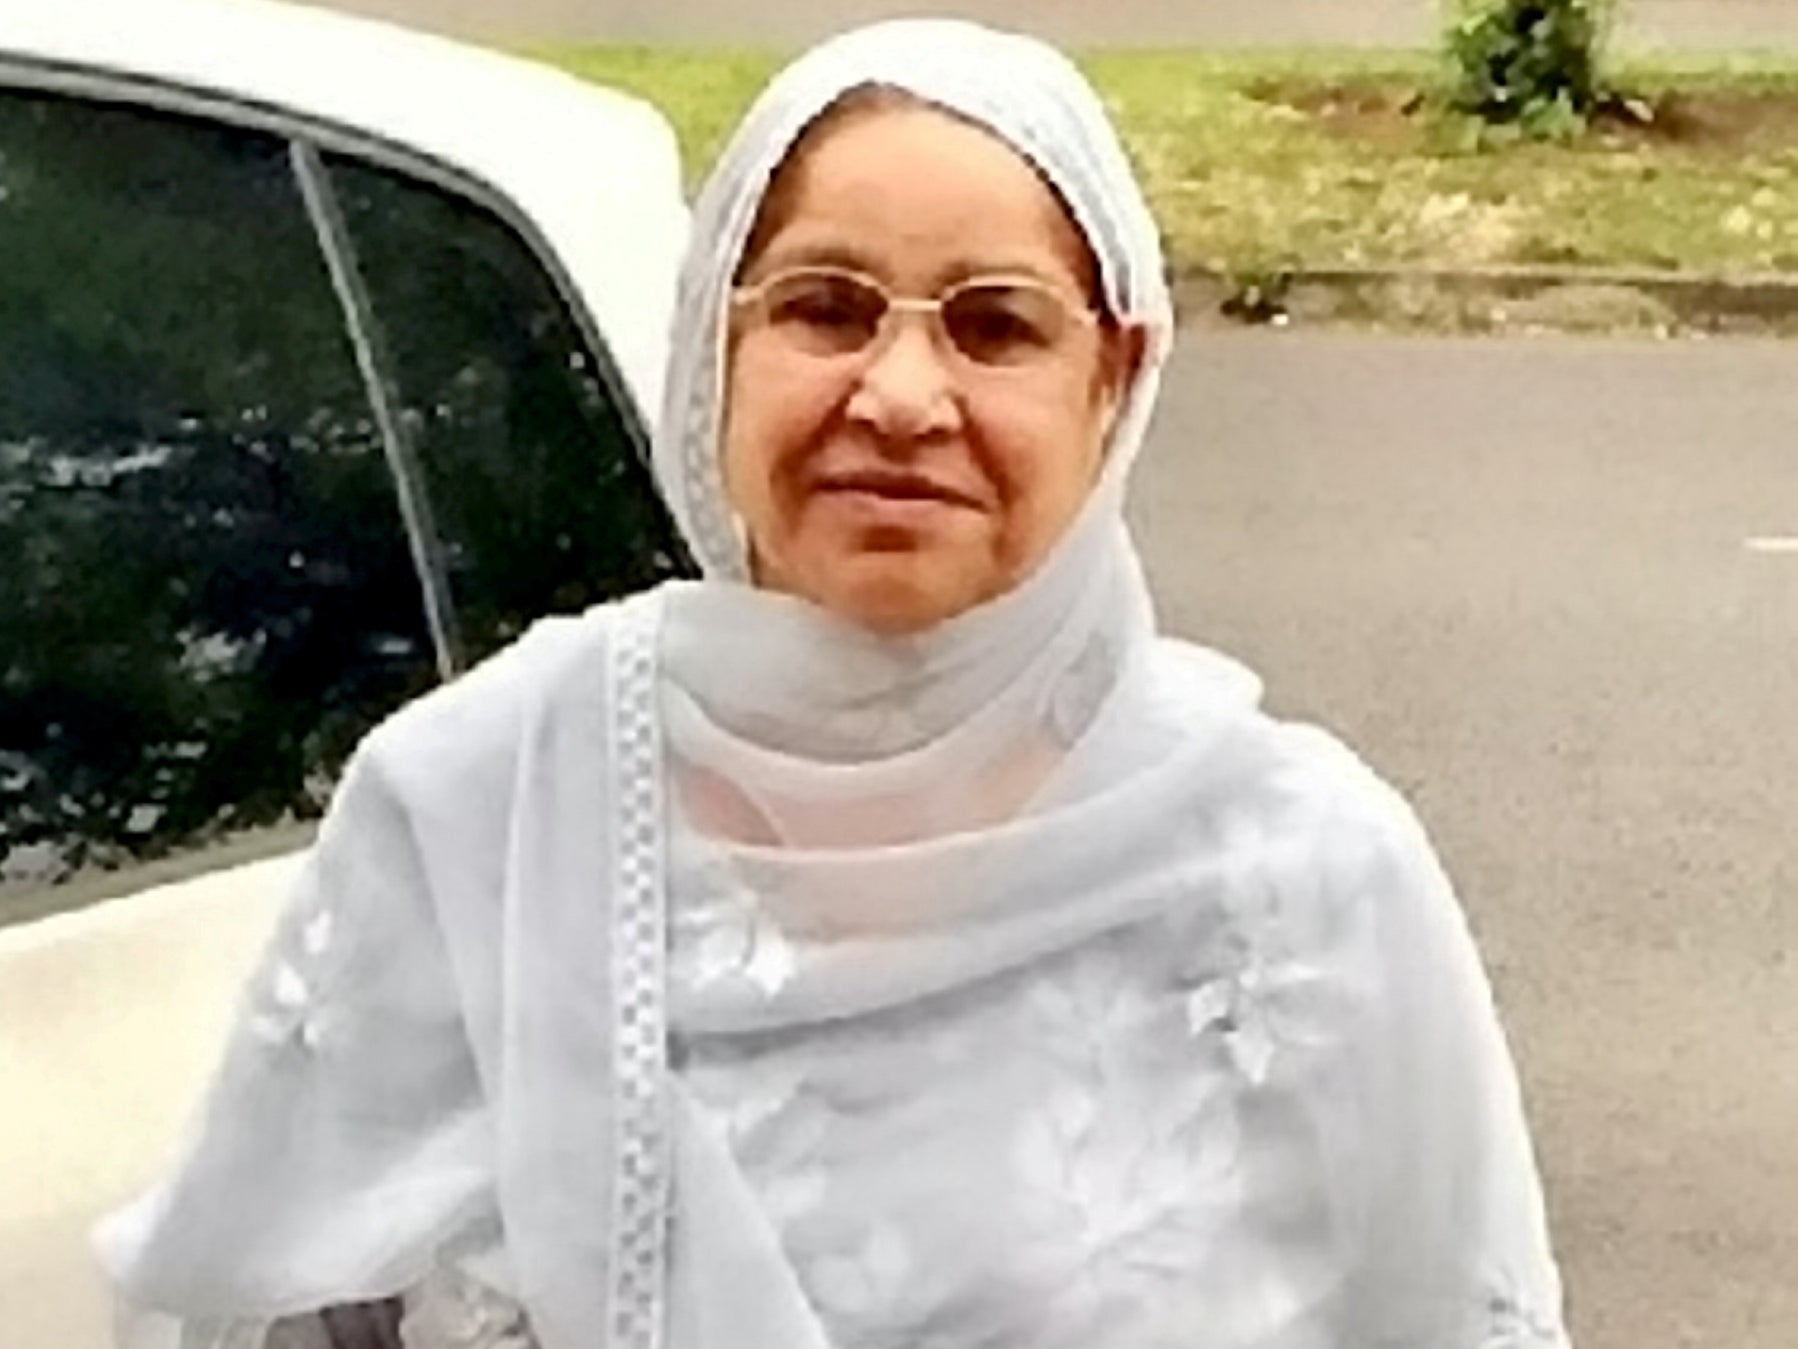 Eighty-year-old Irshad Begum was killed in April by a banned driver